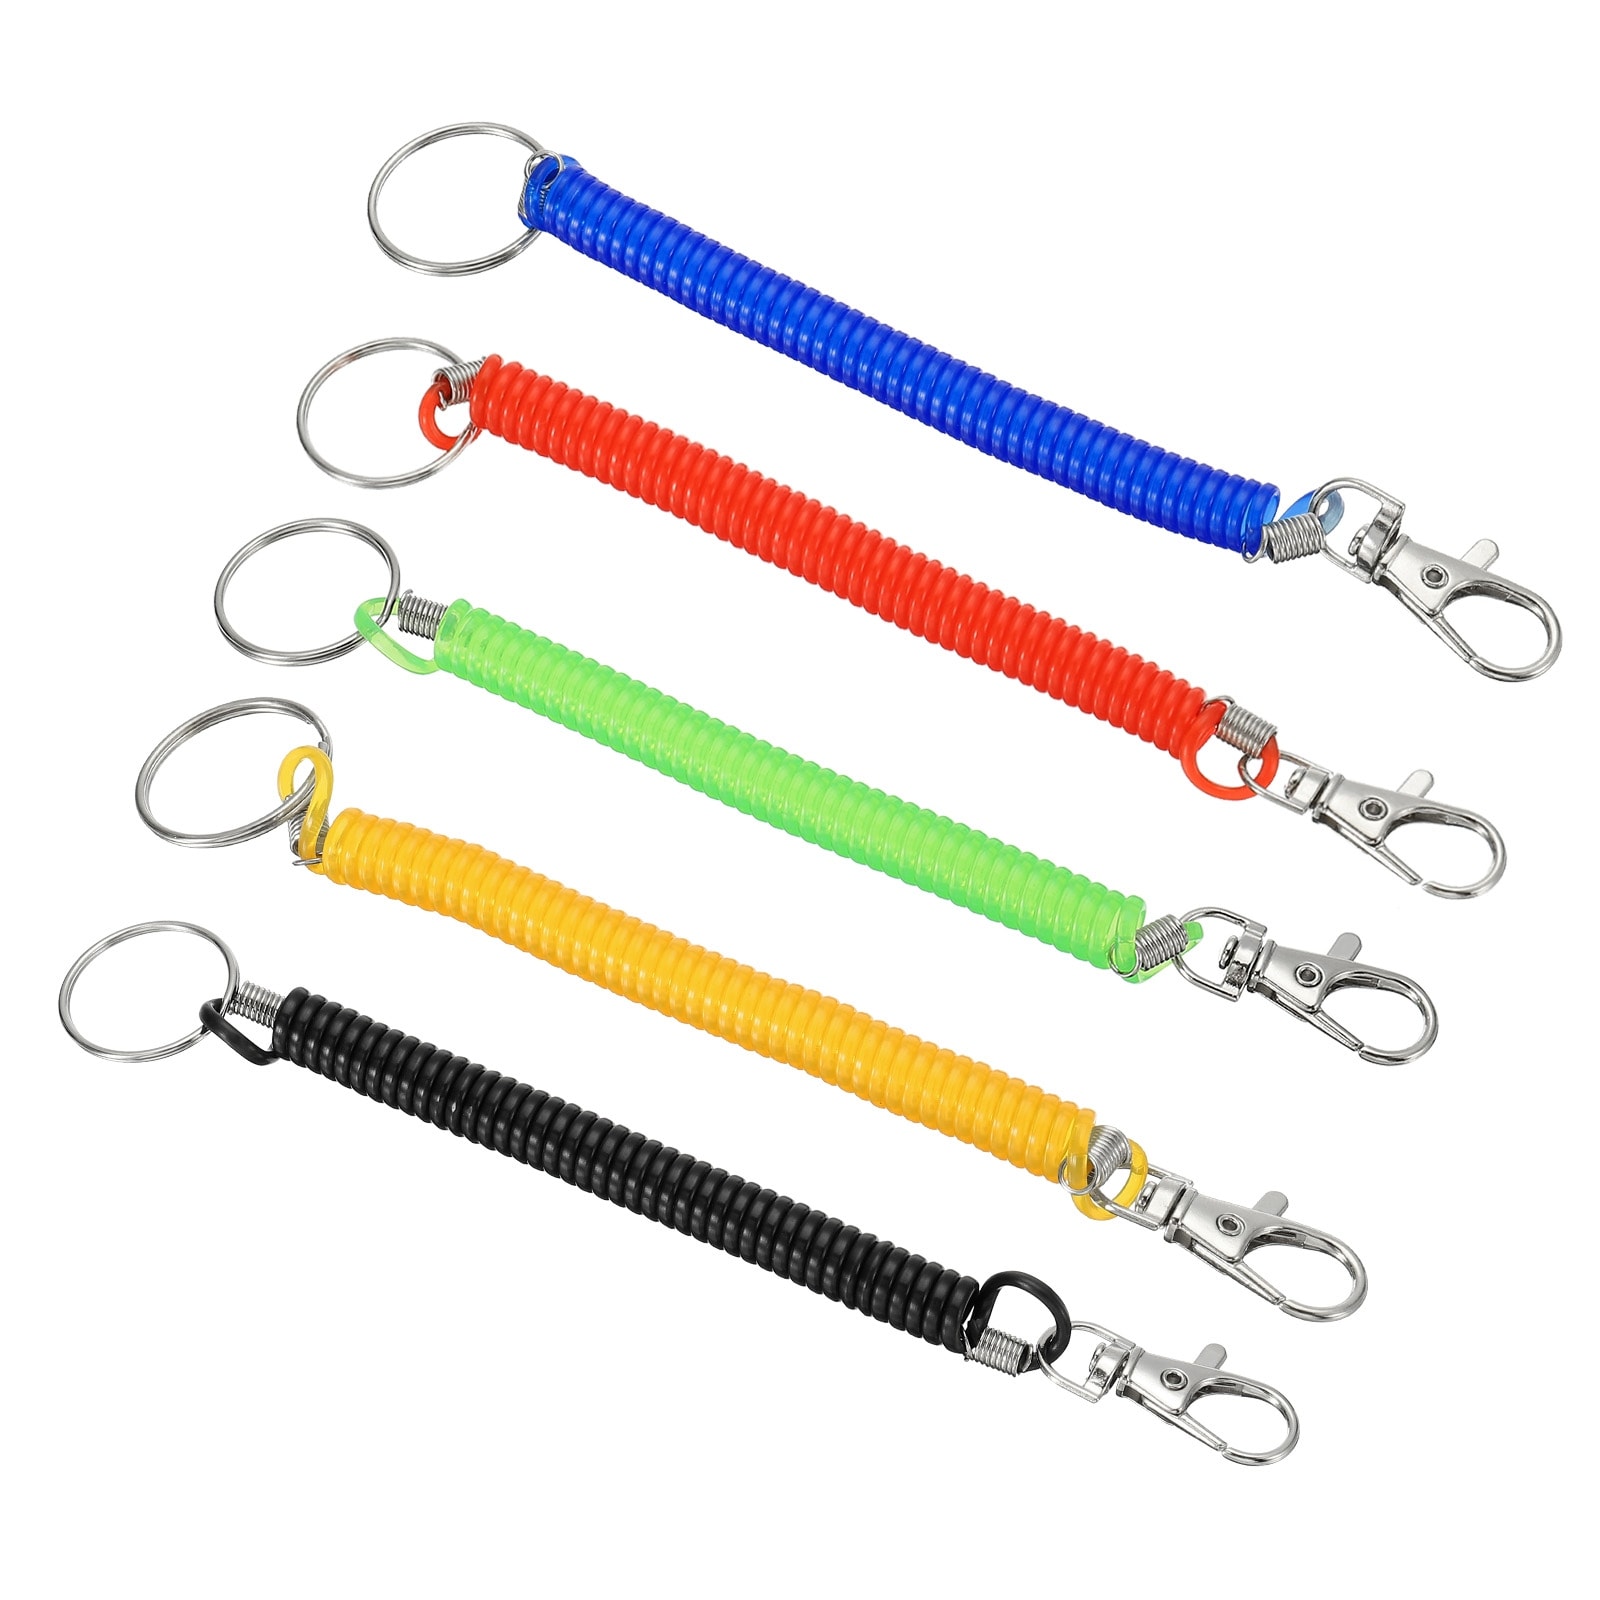 Unique Bargains 6.7 Spiral Retractable Spring Coil Keychain, 3 Pack Key Ring - Red Green Black - 17cm